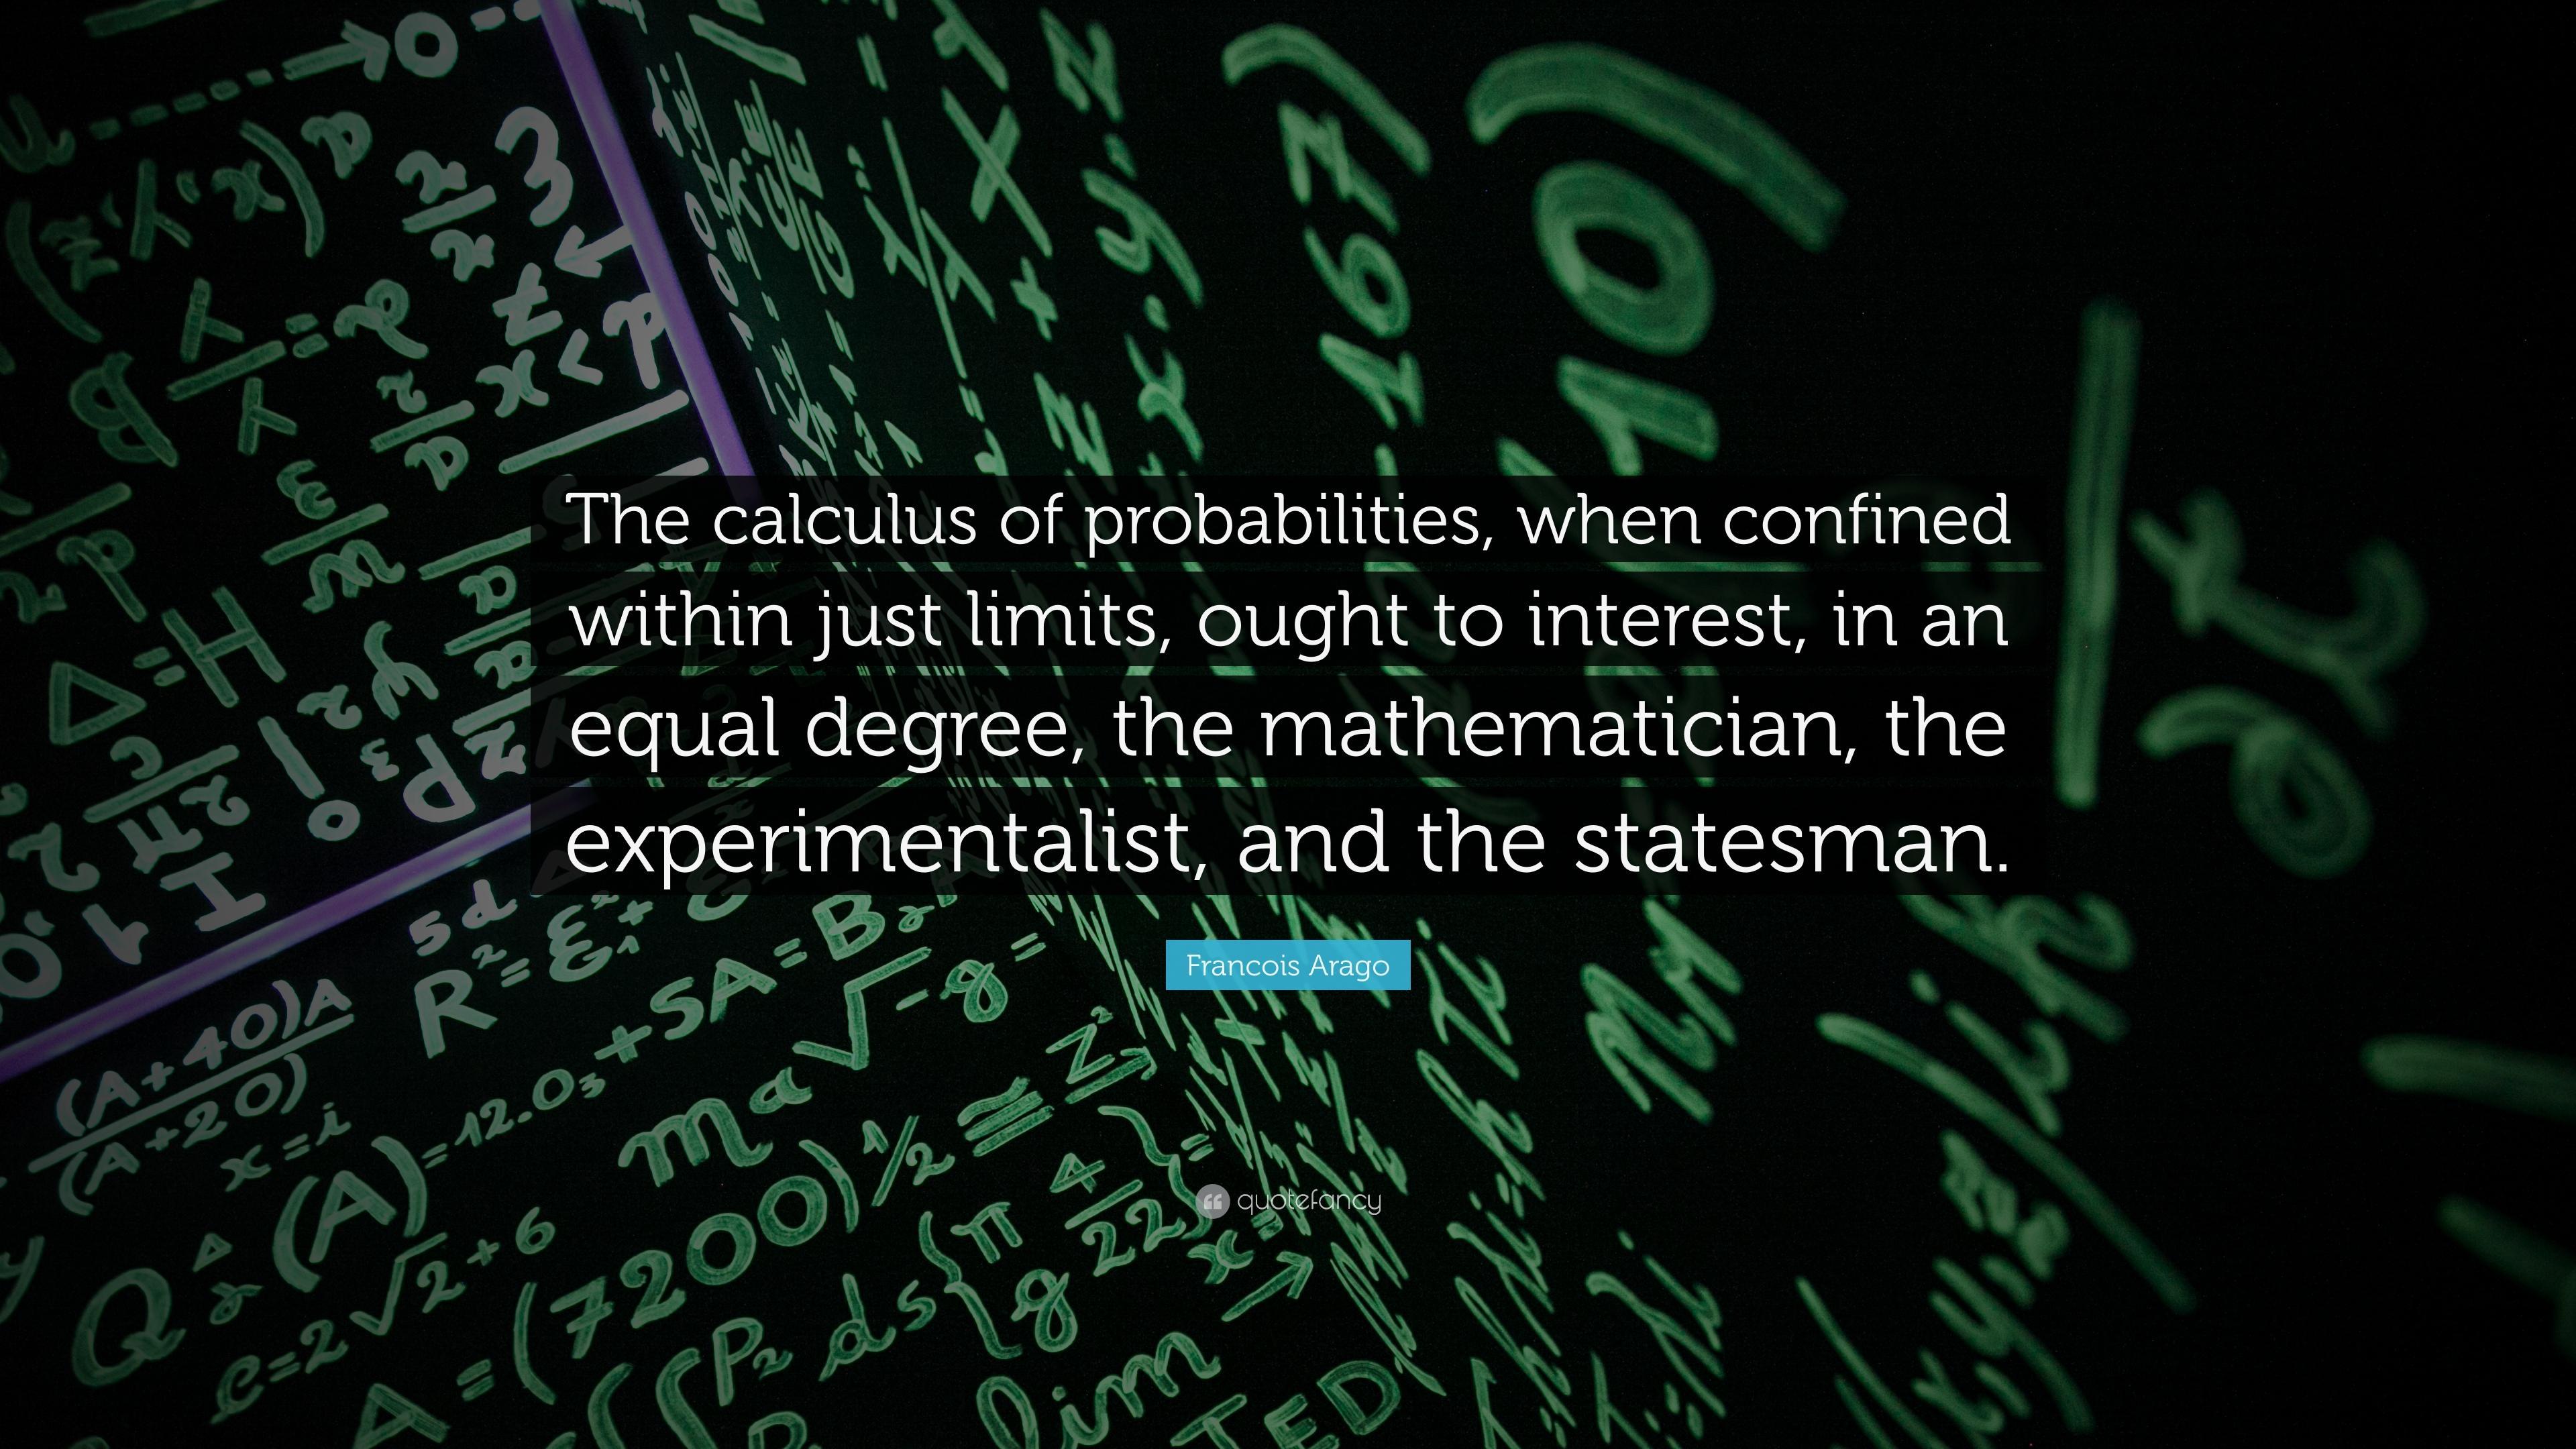 Francois Arago Quote: “The calculus of probabilities, when